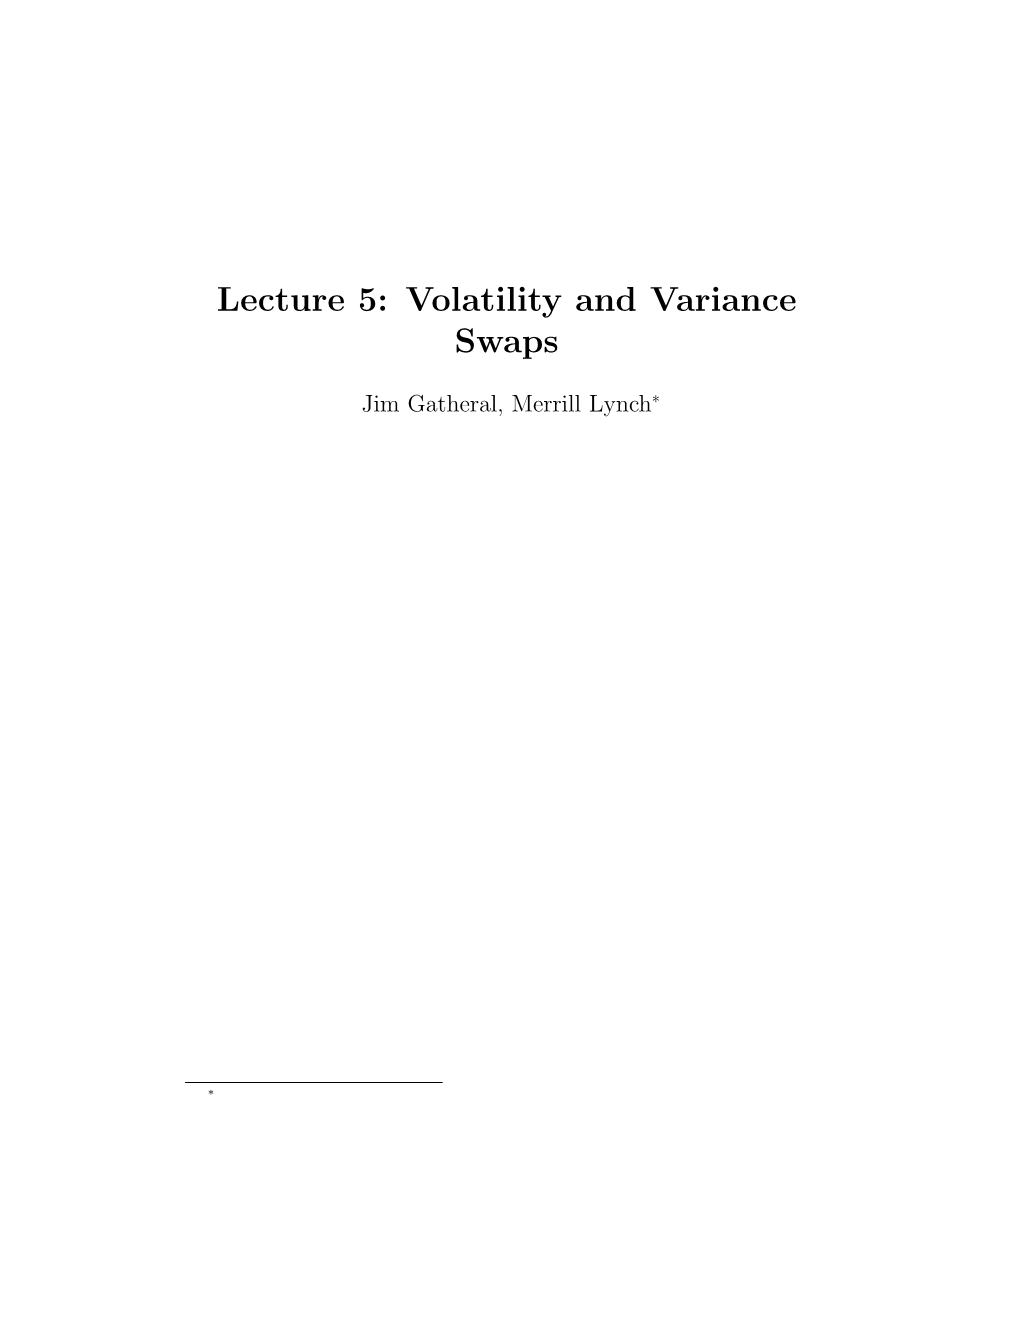 Lecture 5: Volatility and Variance Swaps